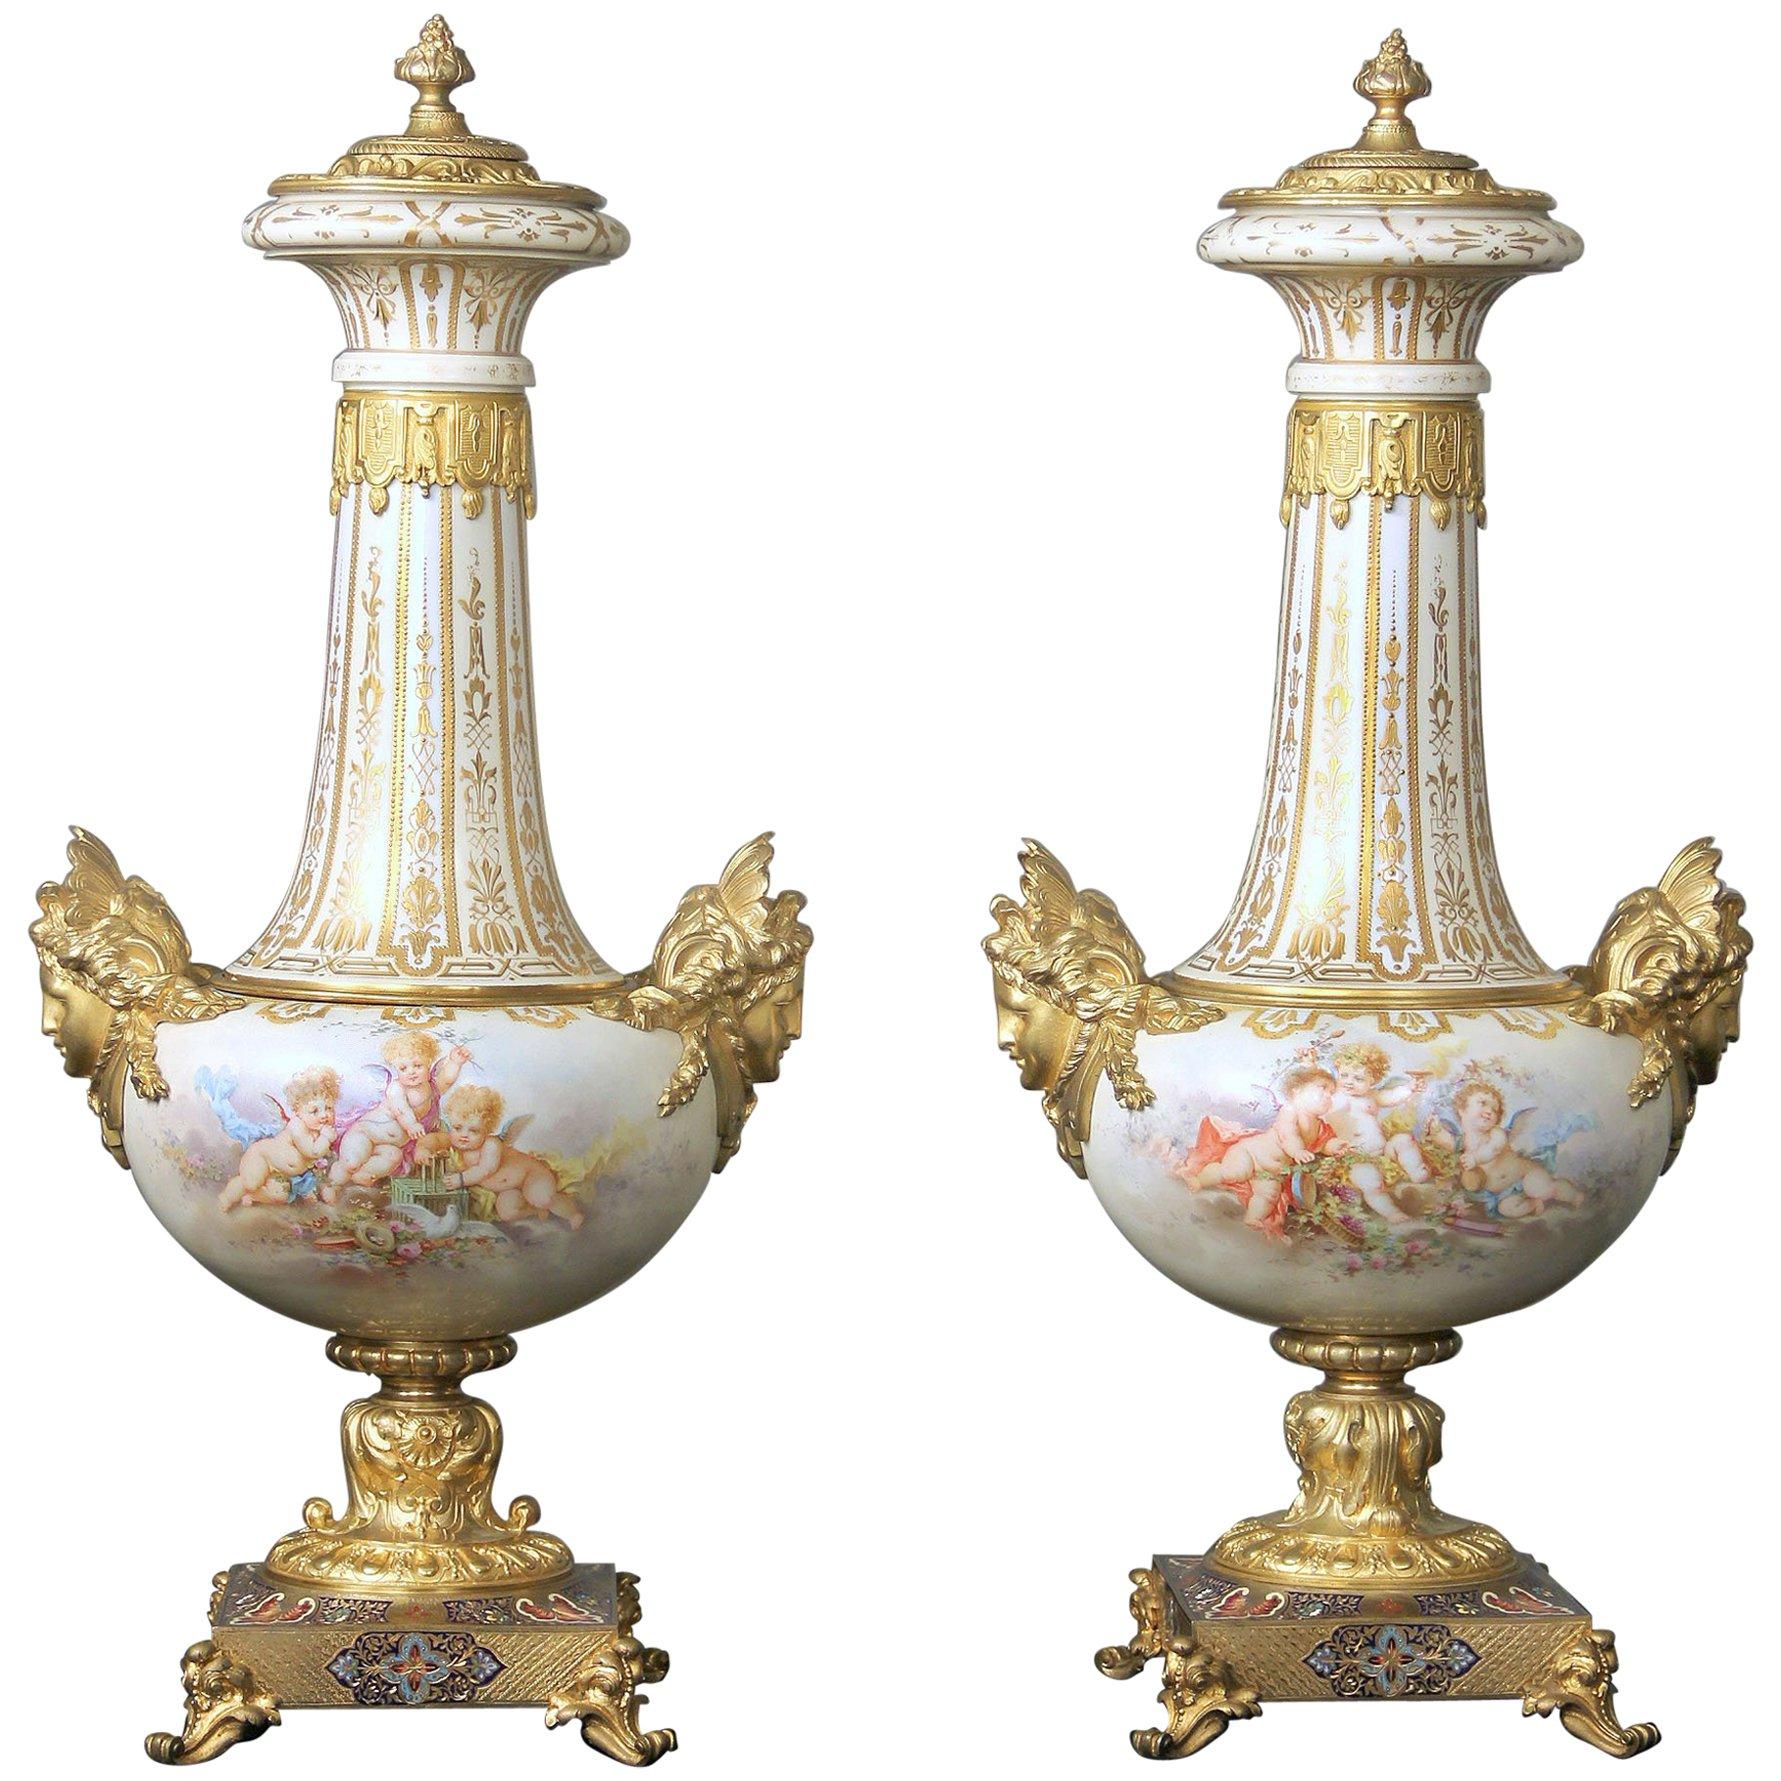 Beautiful Pair of Late 19th Century Gilt Bronze, Enamel and Sèvres Style Vases